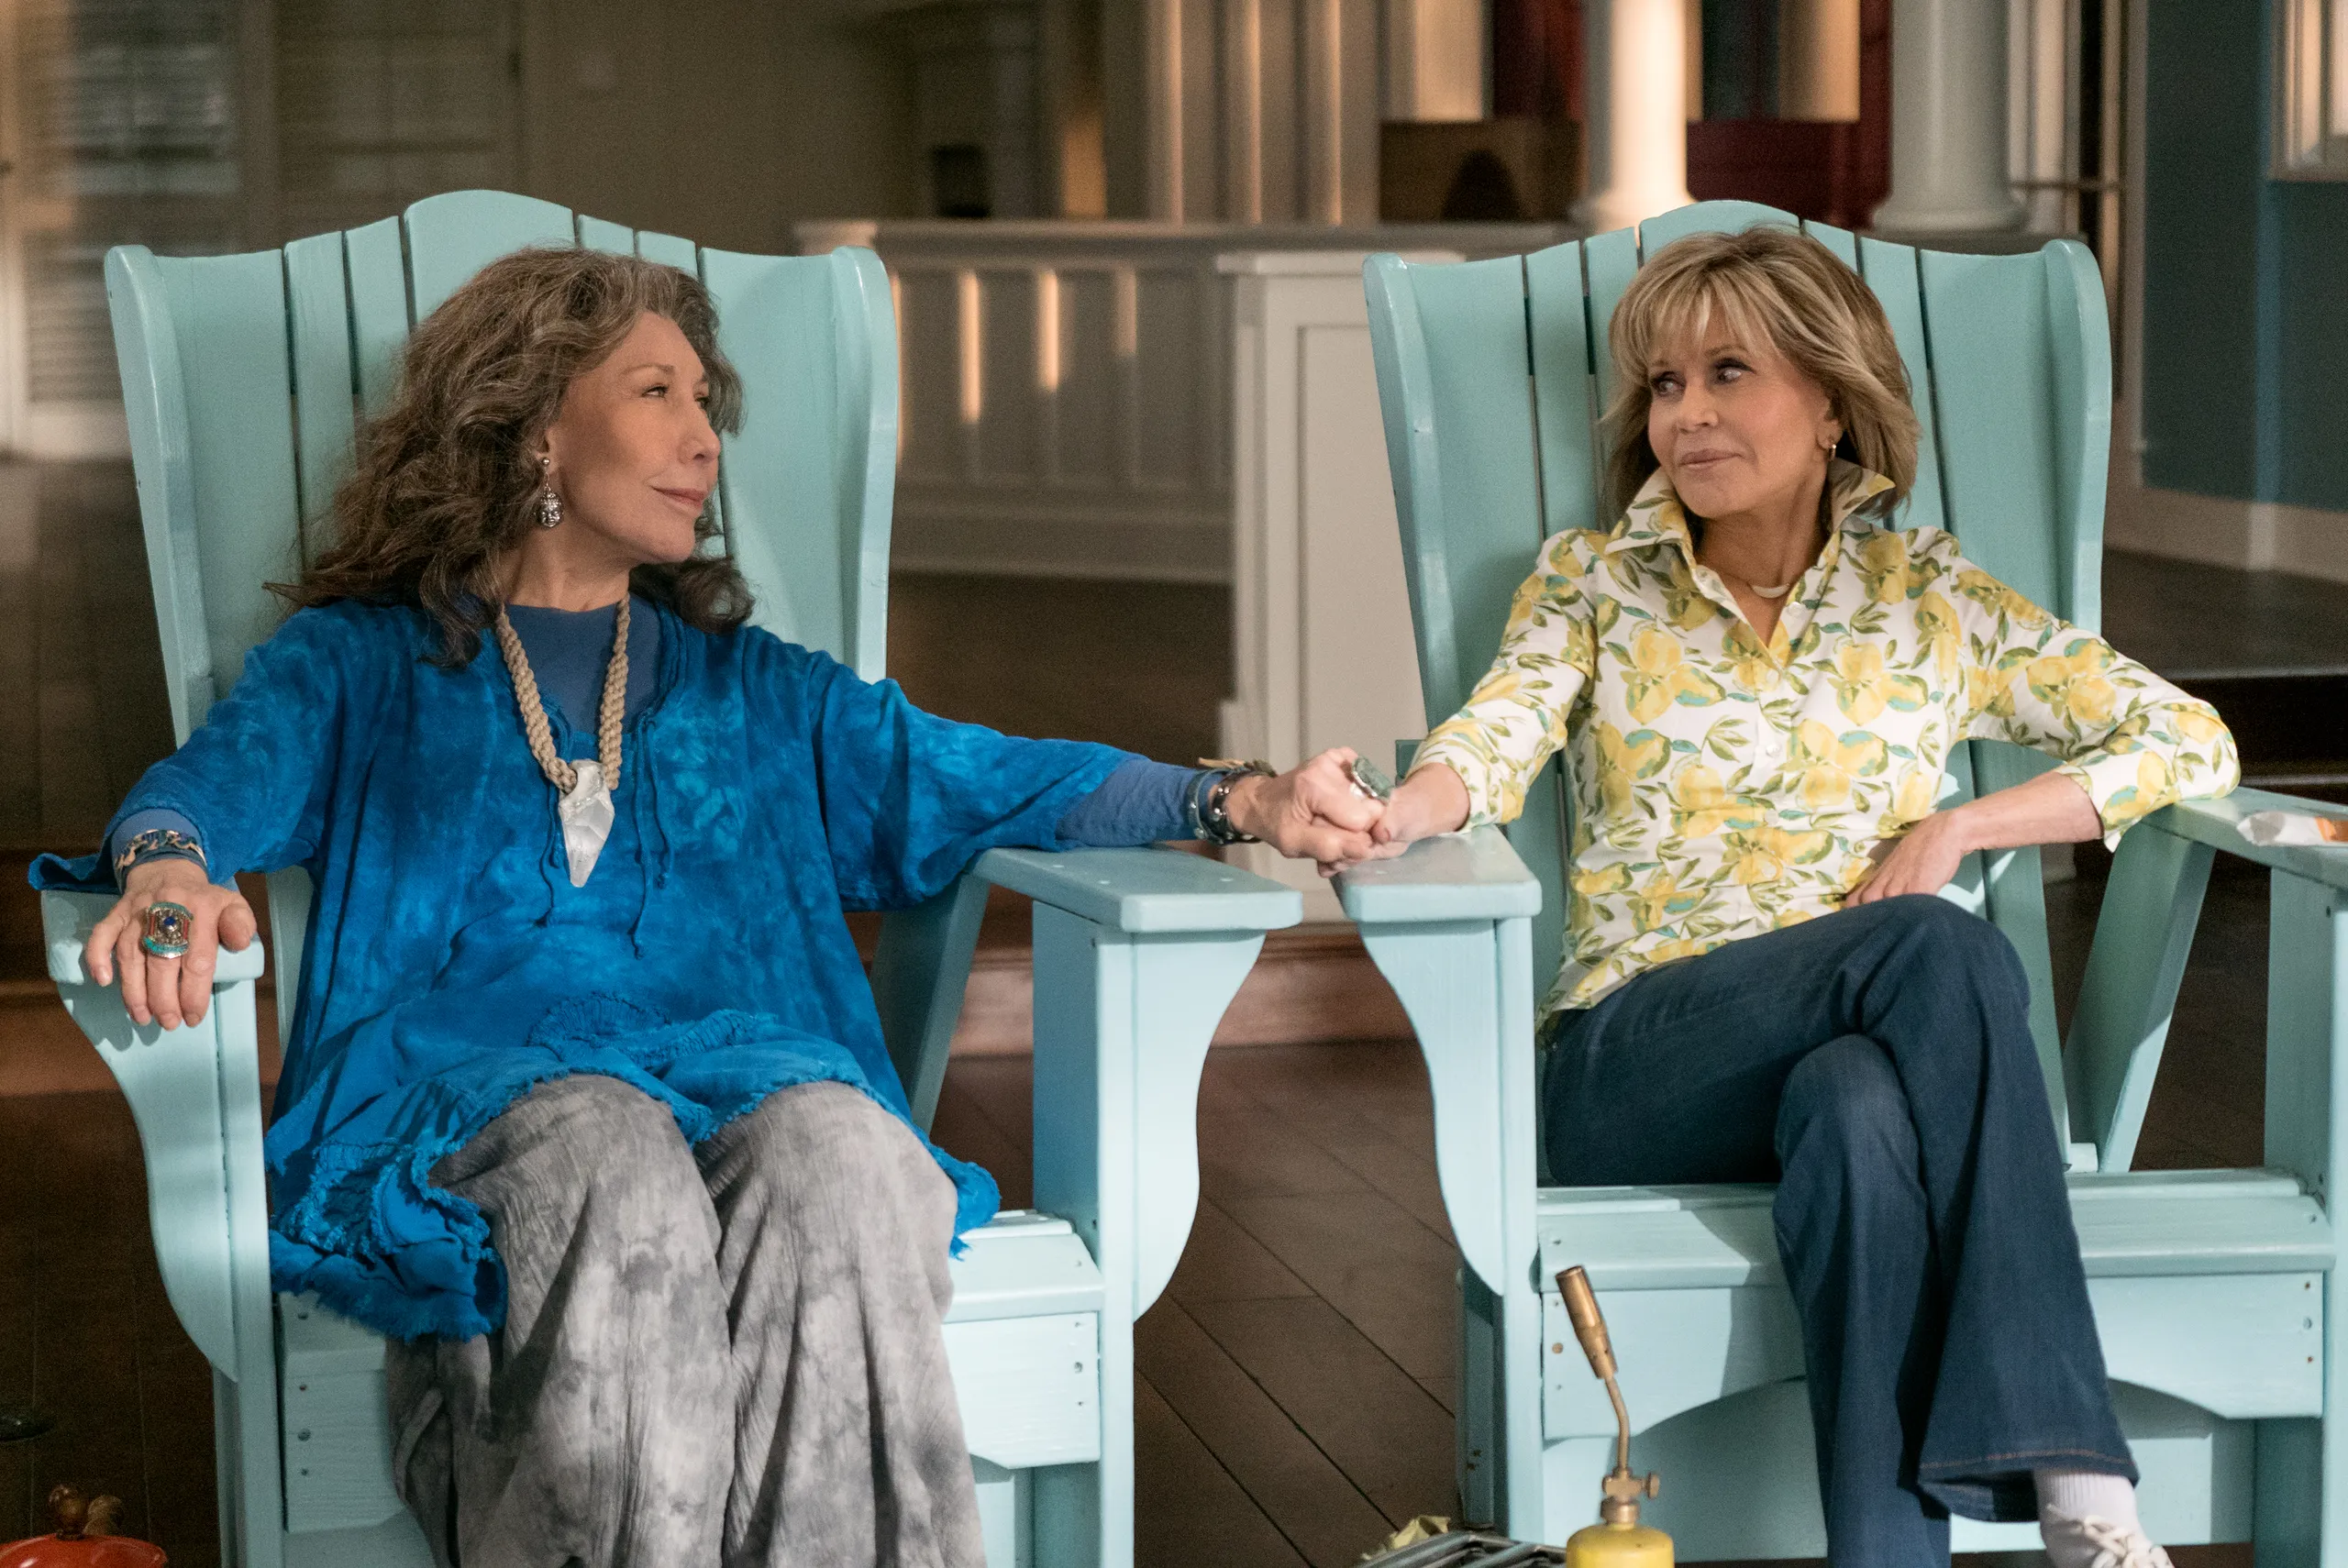 Two older white women, characters Grace and Frankie, sitting outdoors in separate patio chairs while holding hands and gazing at each other.